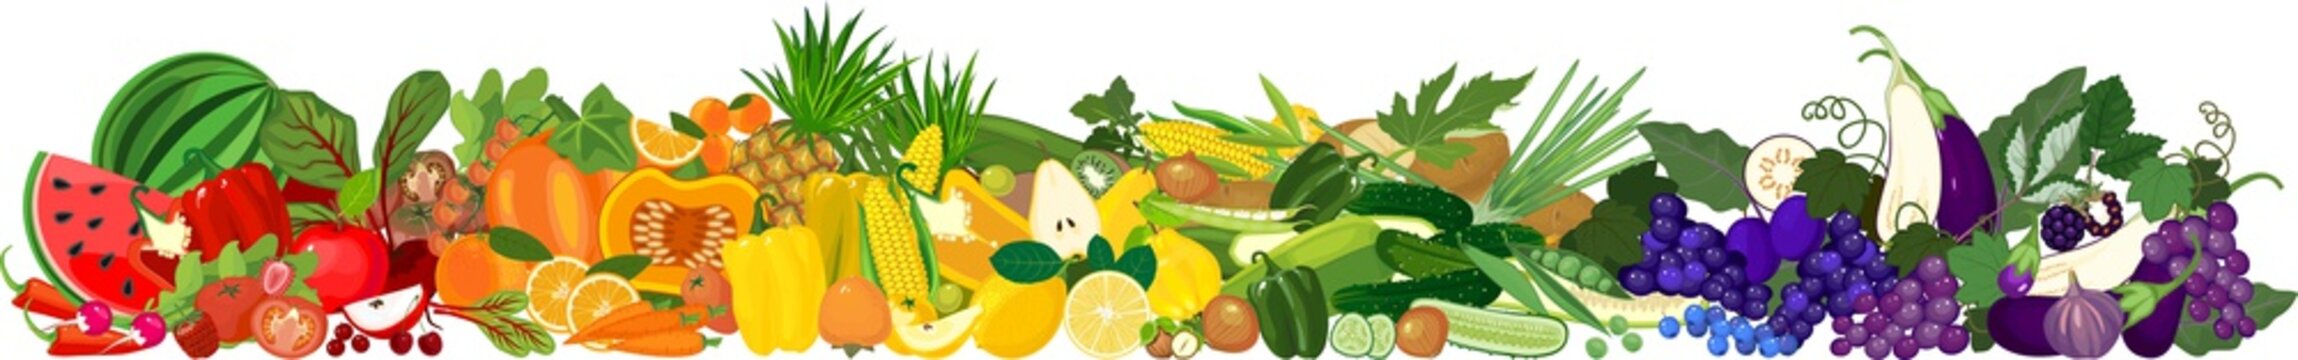 Big set of different ripe fruits and vegetables in all colors of rainbow. Vegetables and fruits border